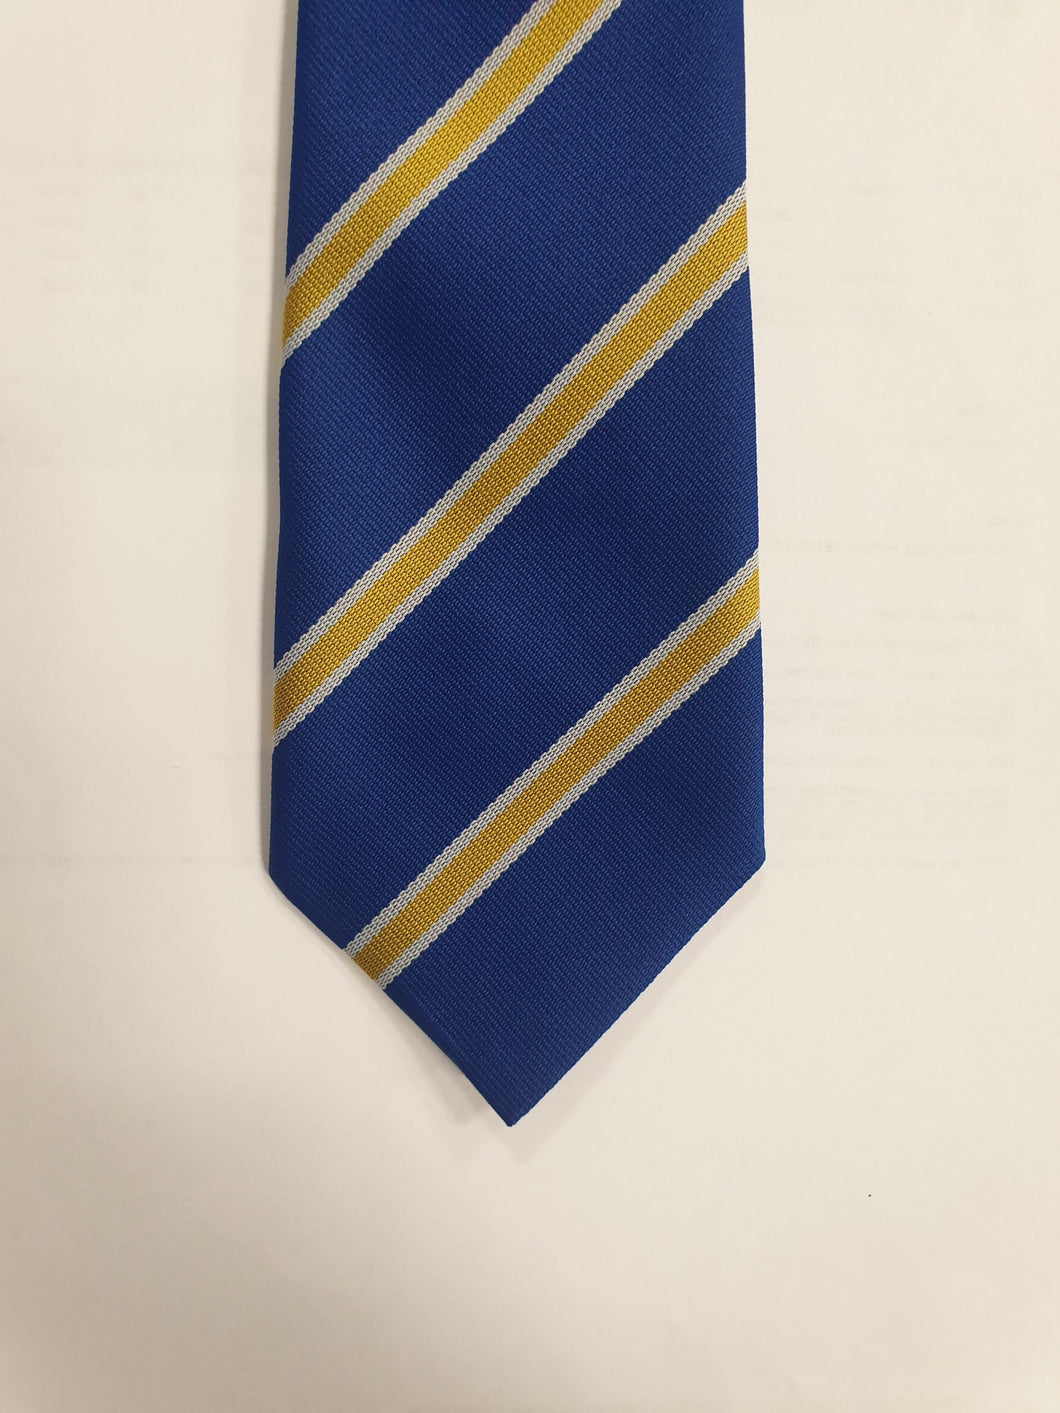 St Mary's College 6th year tie